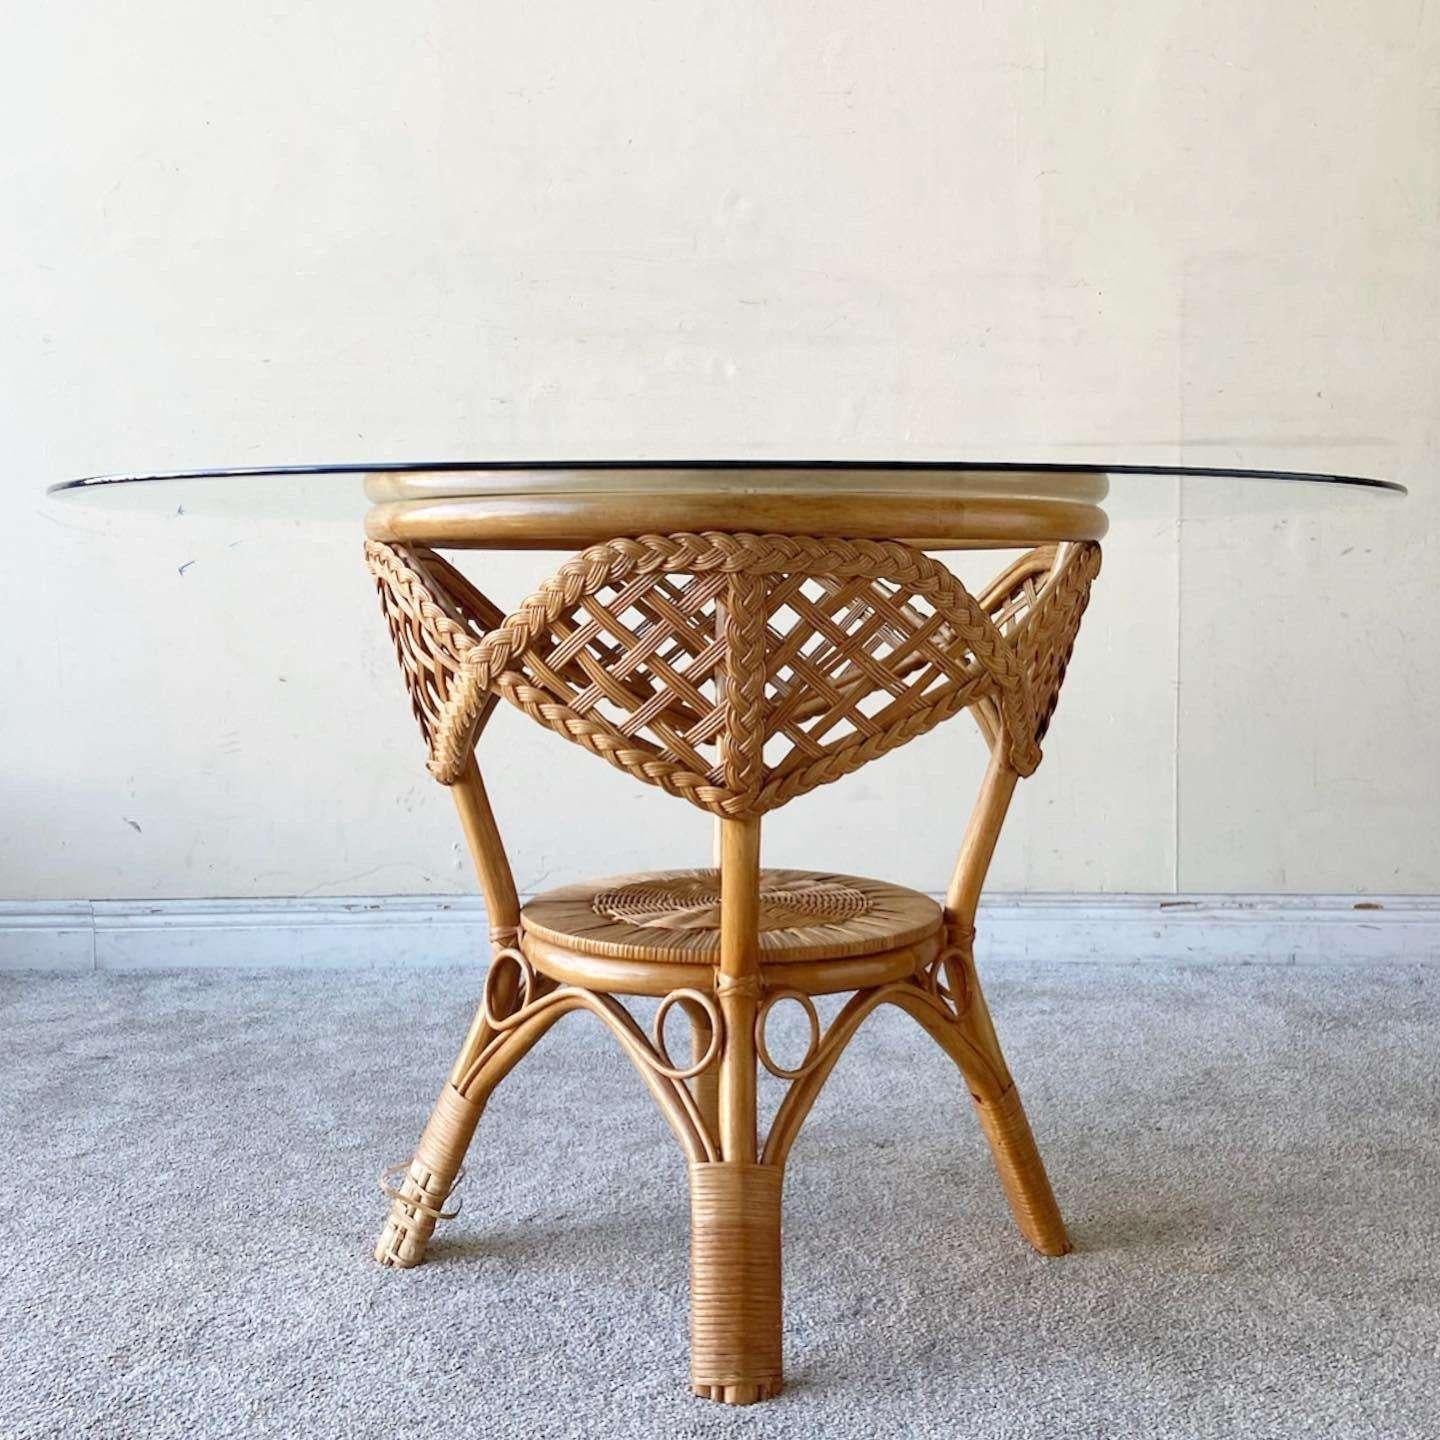 Exceptional vintage bohemian circular glass top dining table. Features a bamboo rattan and woven wicker pedestal base.